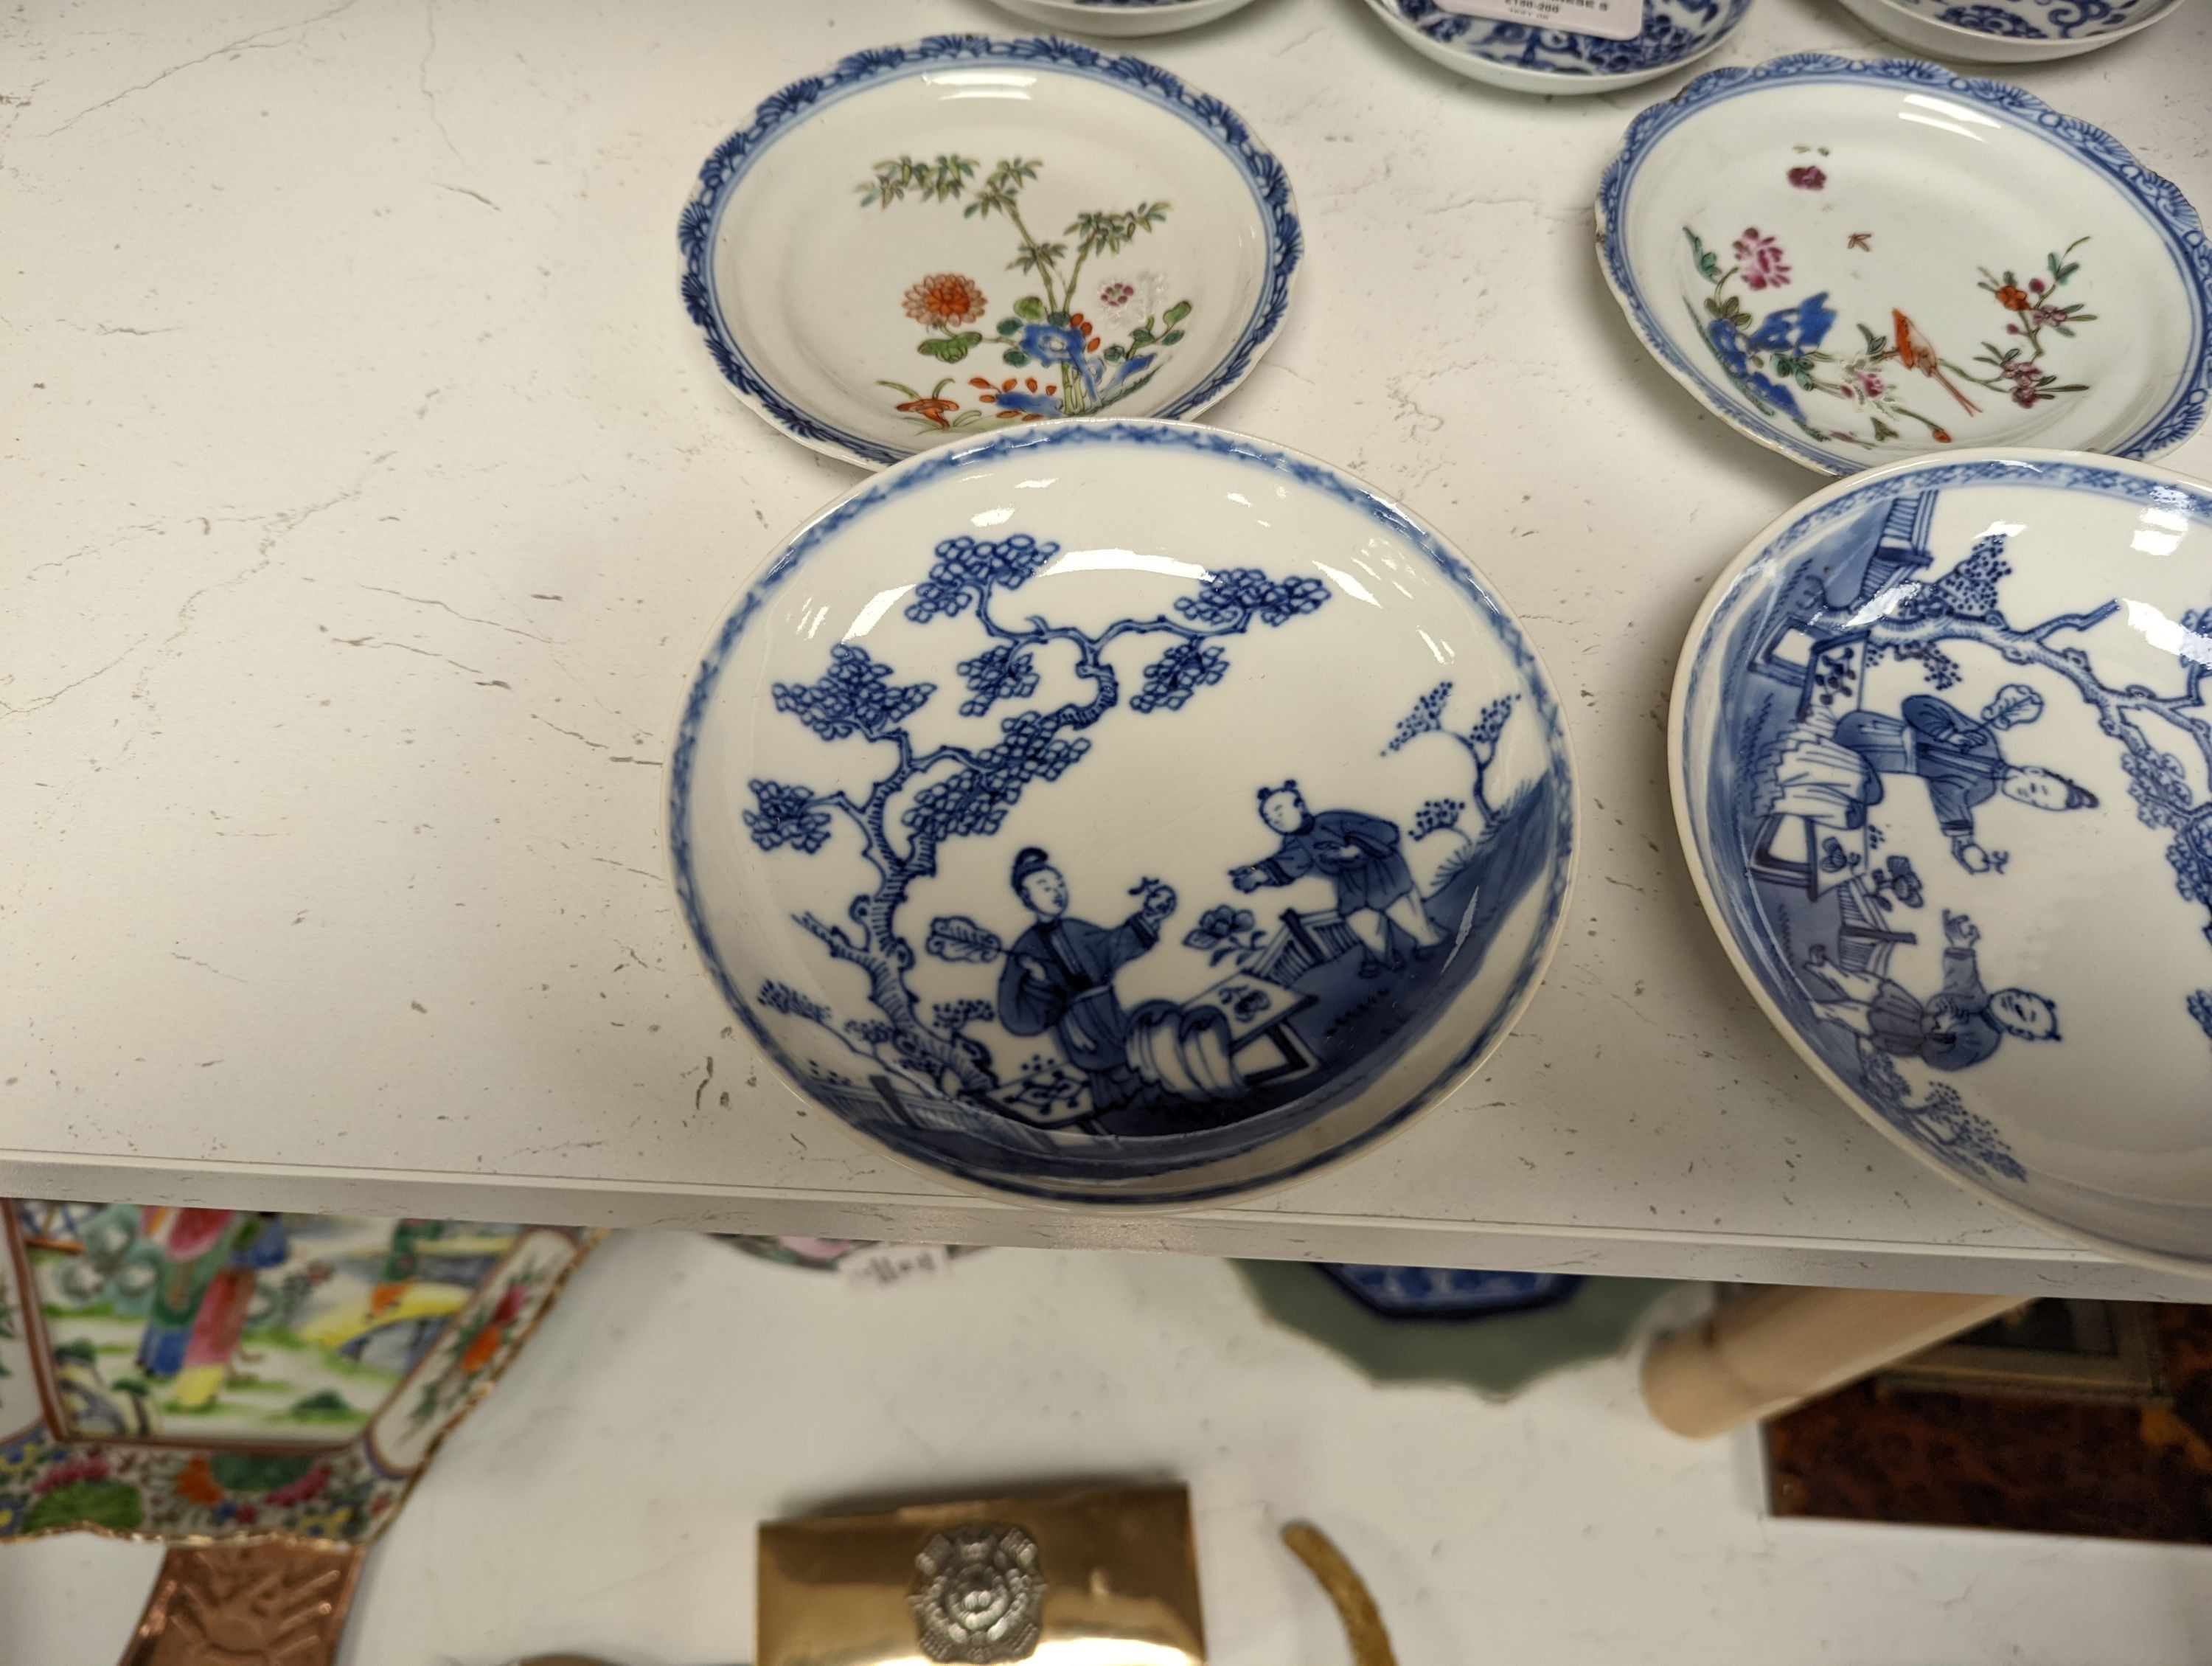 Seven 18th century Chinese saucer dishes, largest 14 cms diameter.